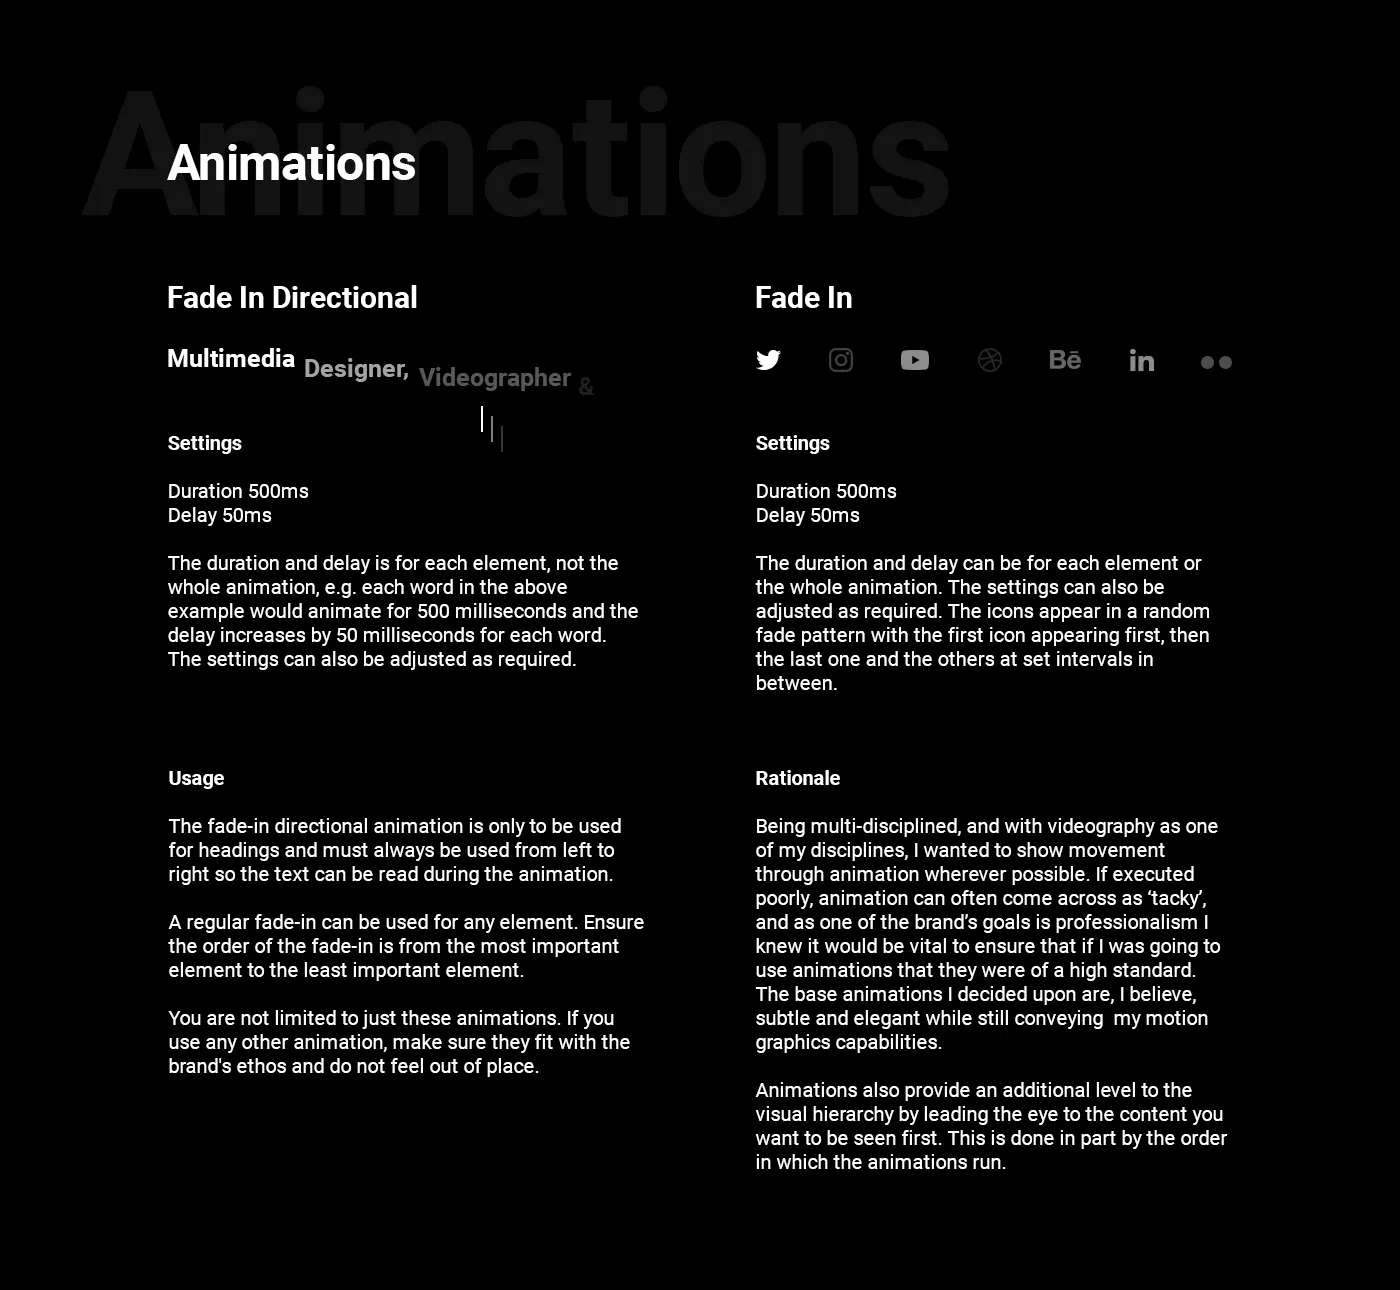 The animation page provides an overview of the animation styles to be used by the brand